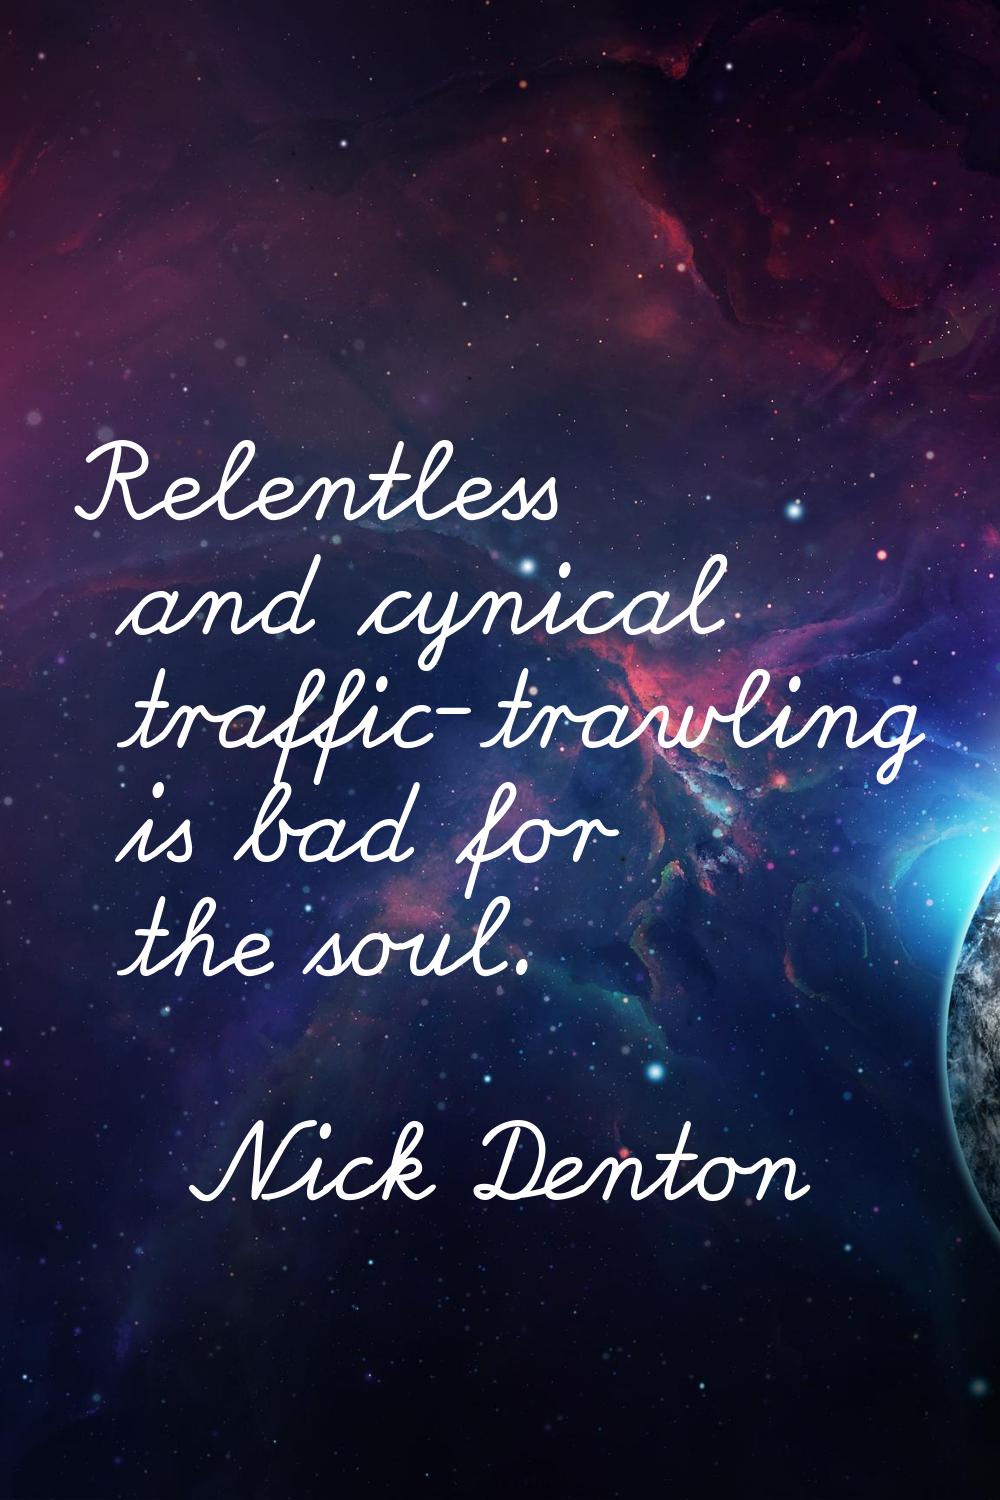 Relentless and cynical traffic-trawling is bad for the soul.